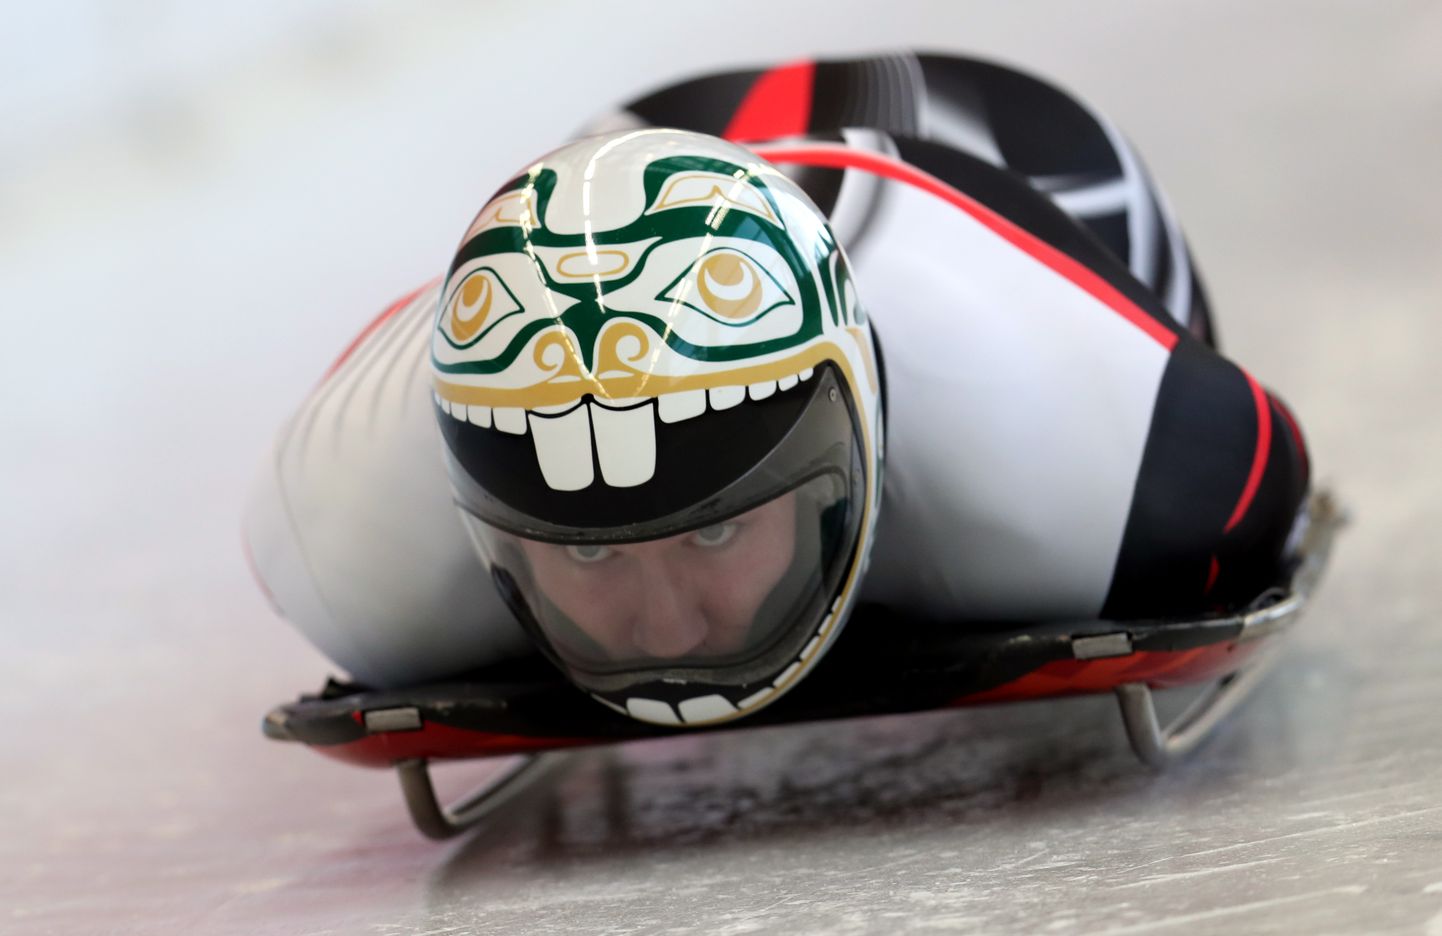 Kevin Boyer of Canada practices during Men's Skeleton during a preview day at the Olympic Sliding Centre ahead of the PyeongChang 2018 Winter Olympic Games in South Korea. PRESS ASSOCIATION Photo. Picture date: Wednesday February 7, 2018. See PA story OLYMPICS Winter. Photo credit should read: Mike Egerton/PA Wire. RESTRICTIONS: Editorial use only. No commercial use.